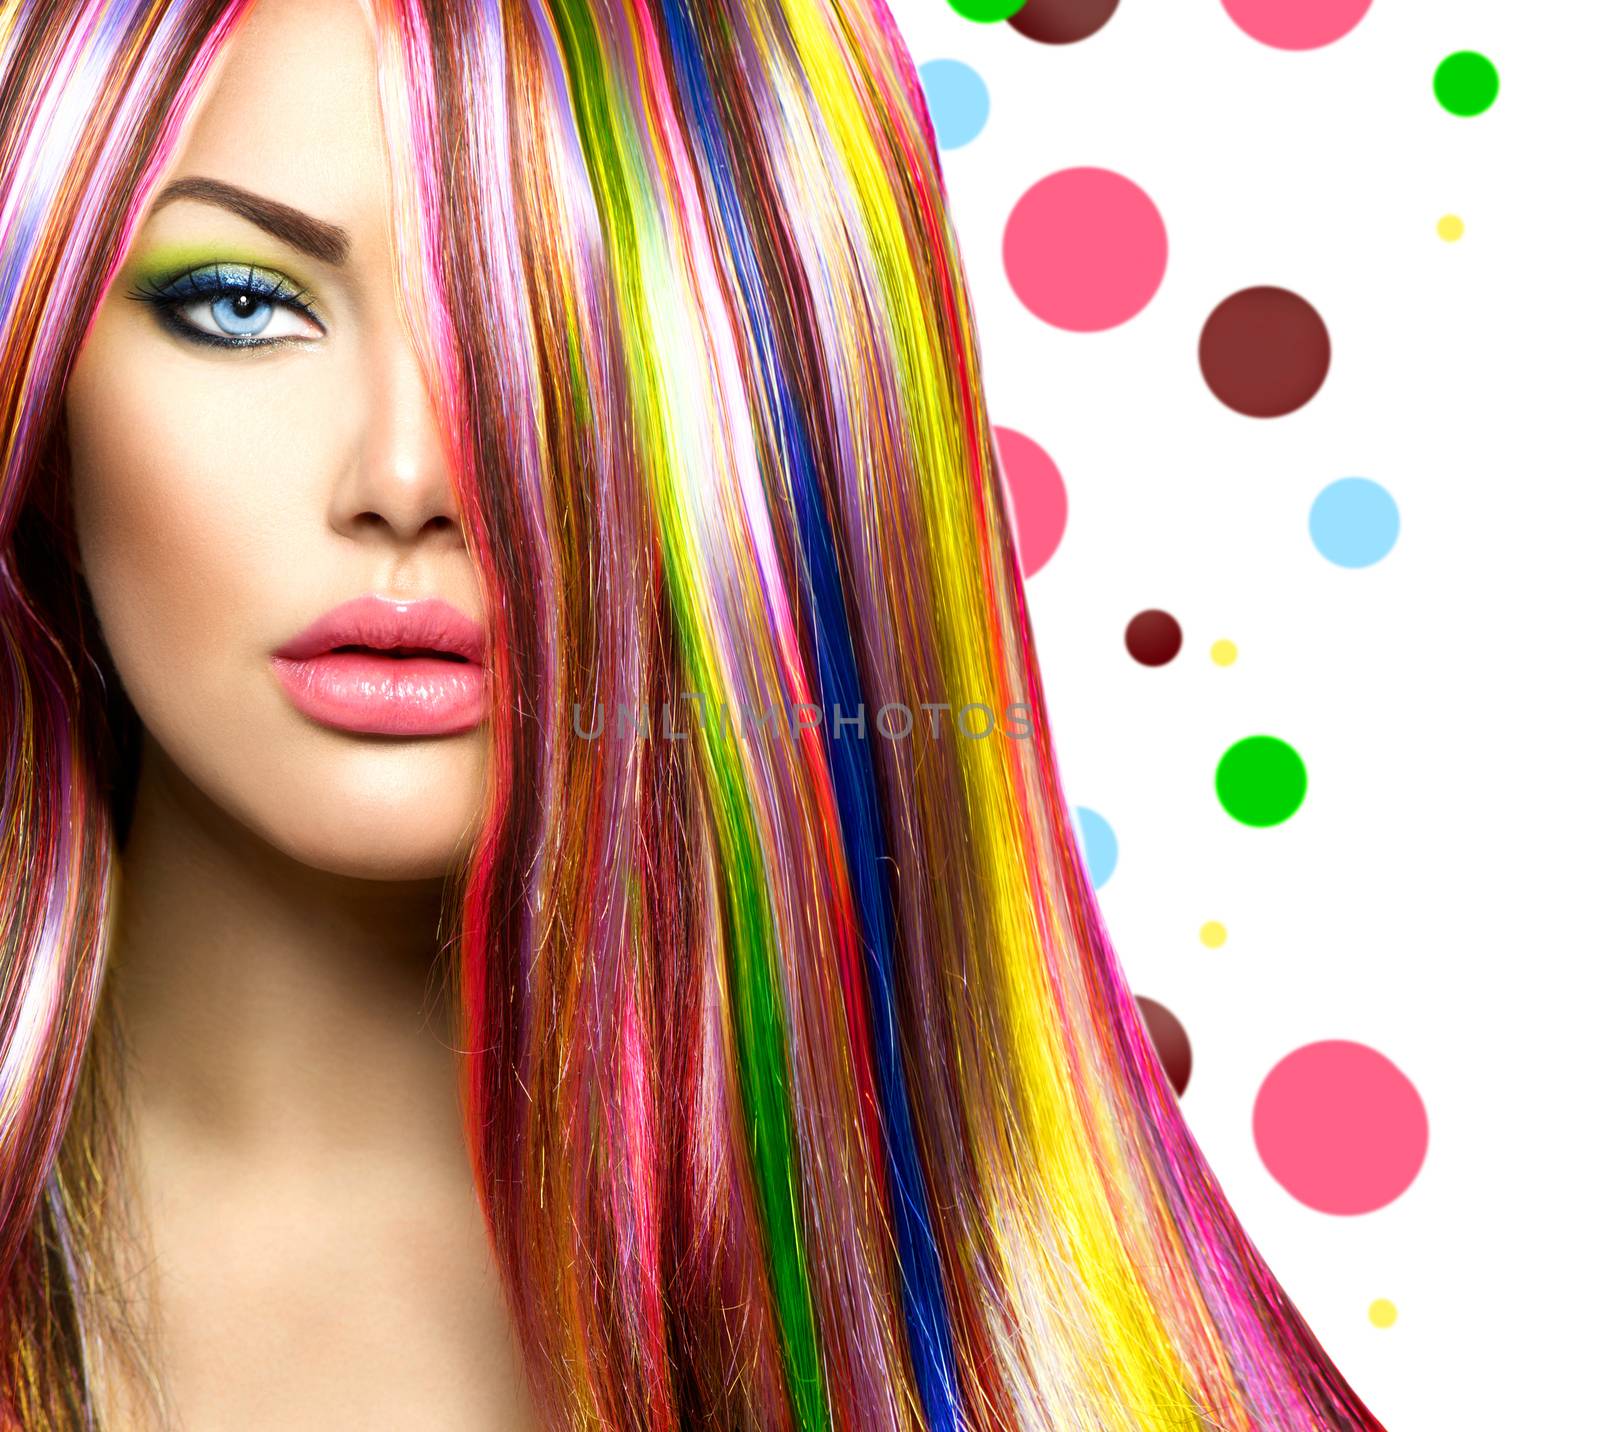 Colorful Hair and Makeup. Beauty Fashion Model Girl by SubbotinaA